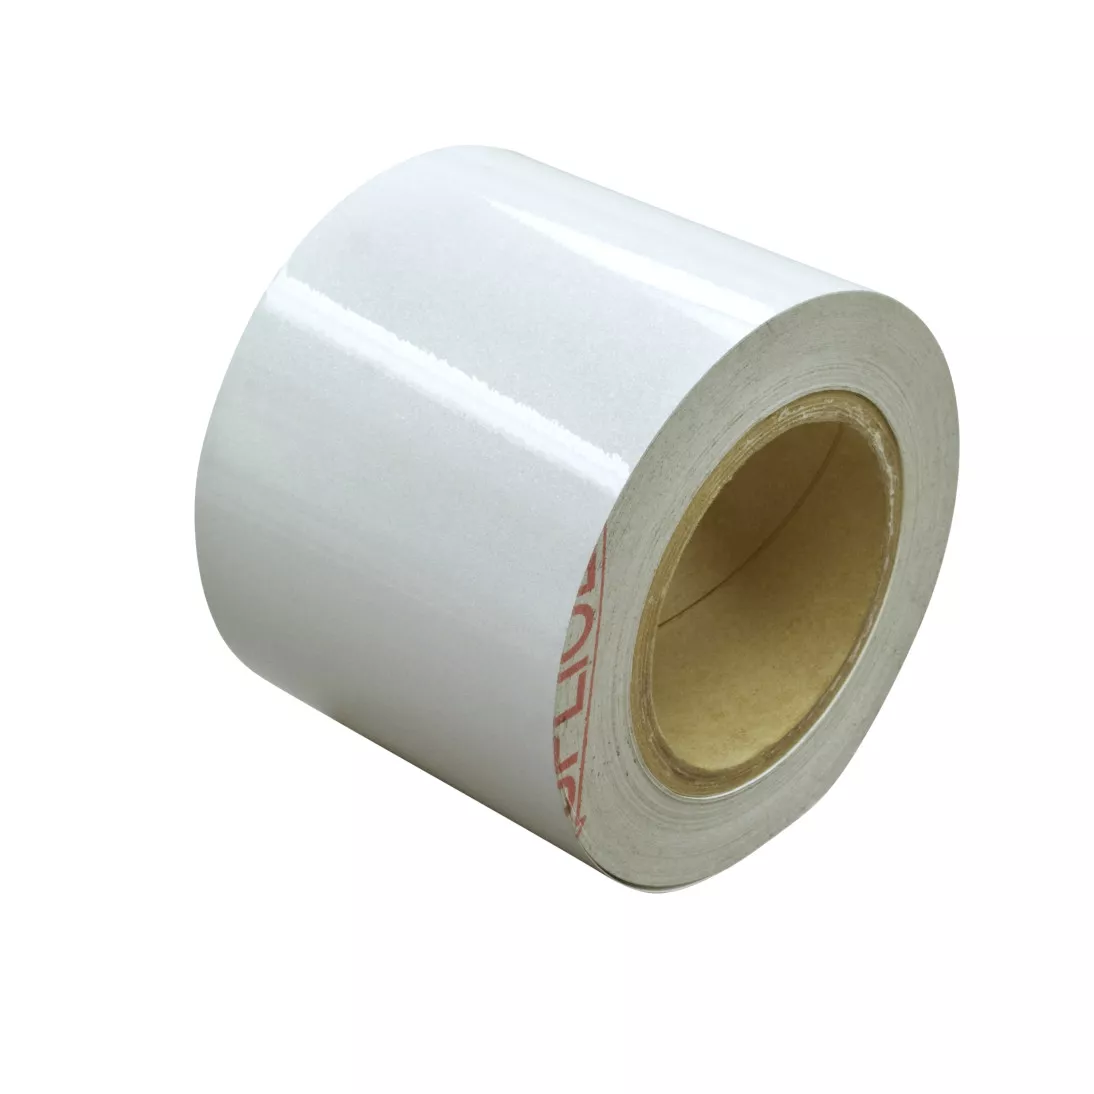 3M™ Thermal Transfer Label Material 3929, Bright Silver Gloss, 6 in x
150 yd, 1 roll per case